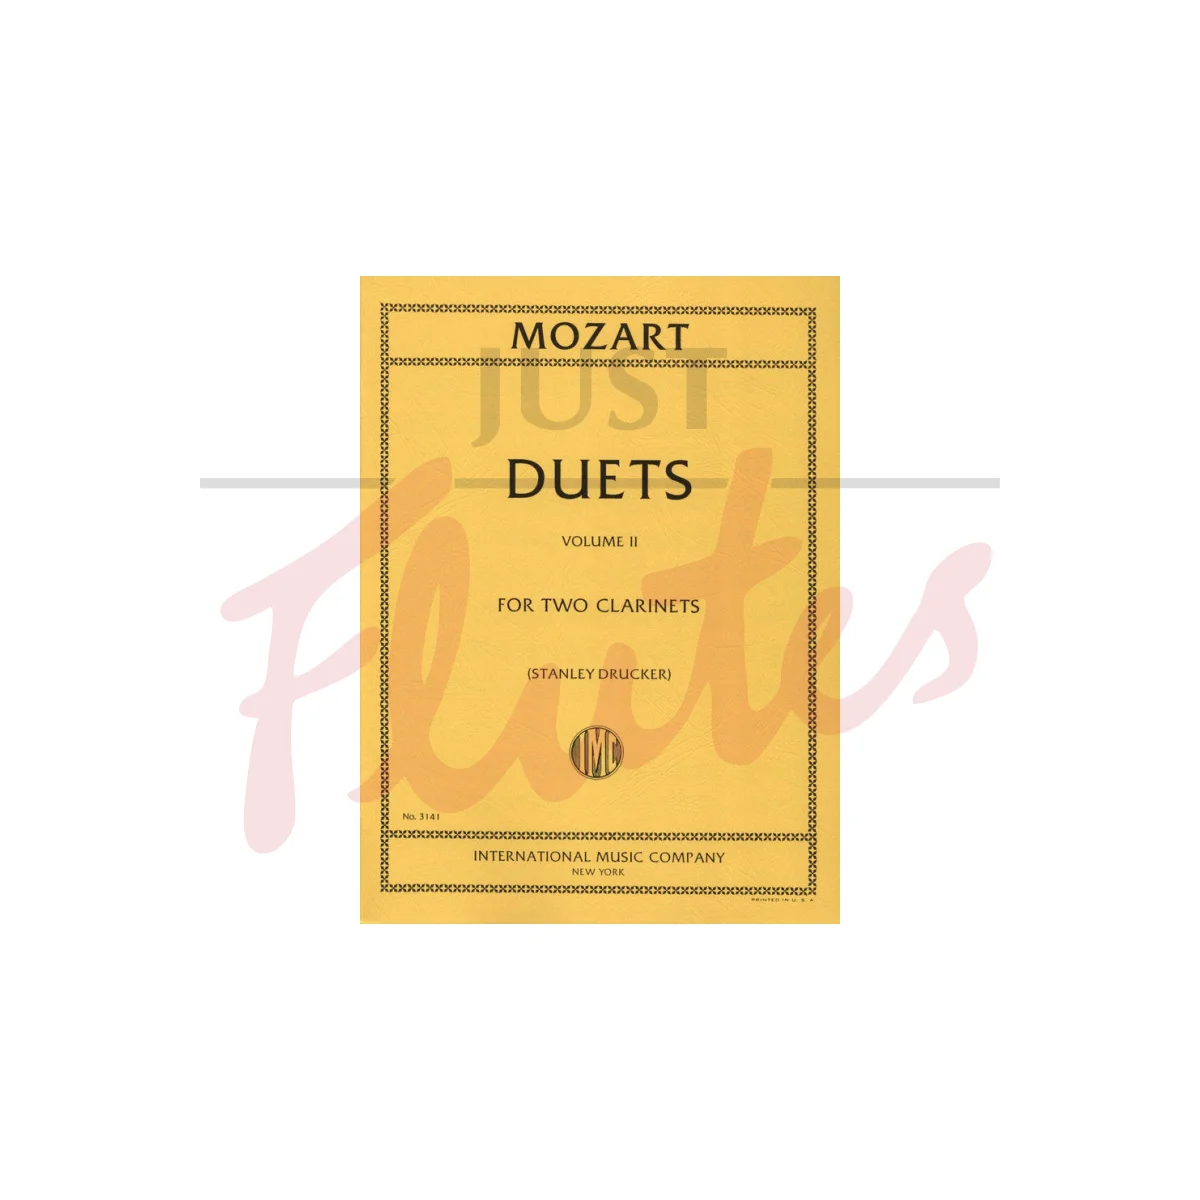 6 Duets for Two Clarinets, Vol. 2